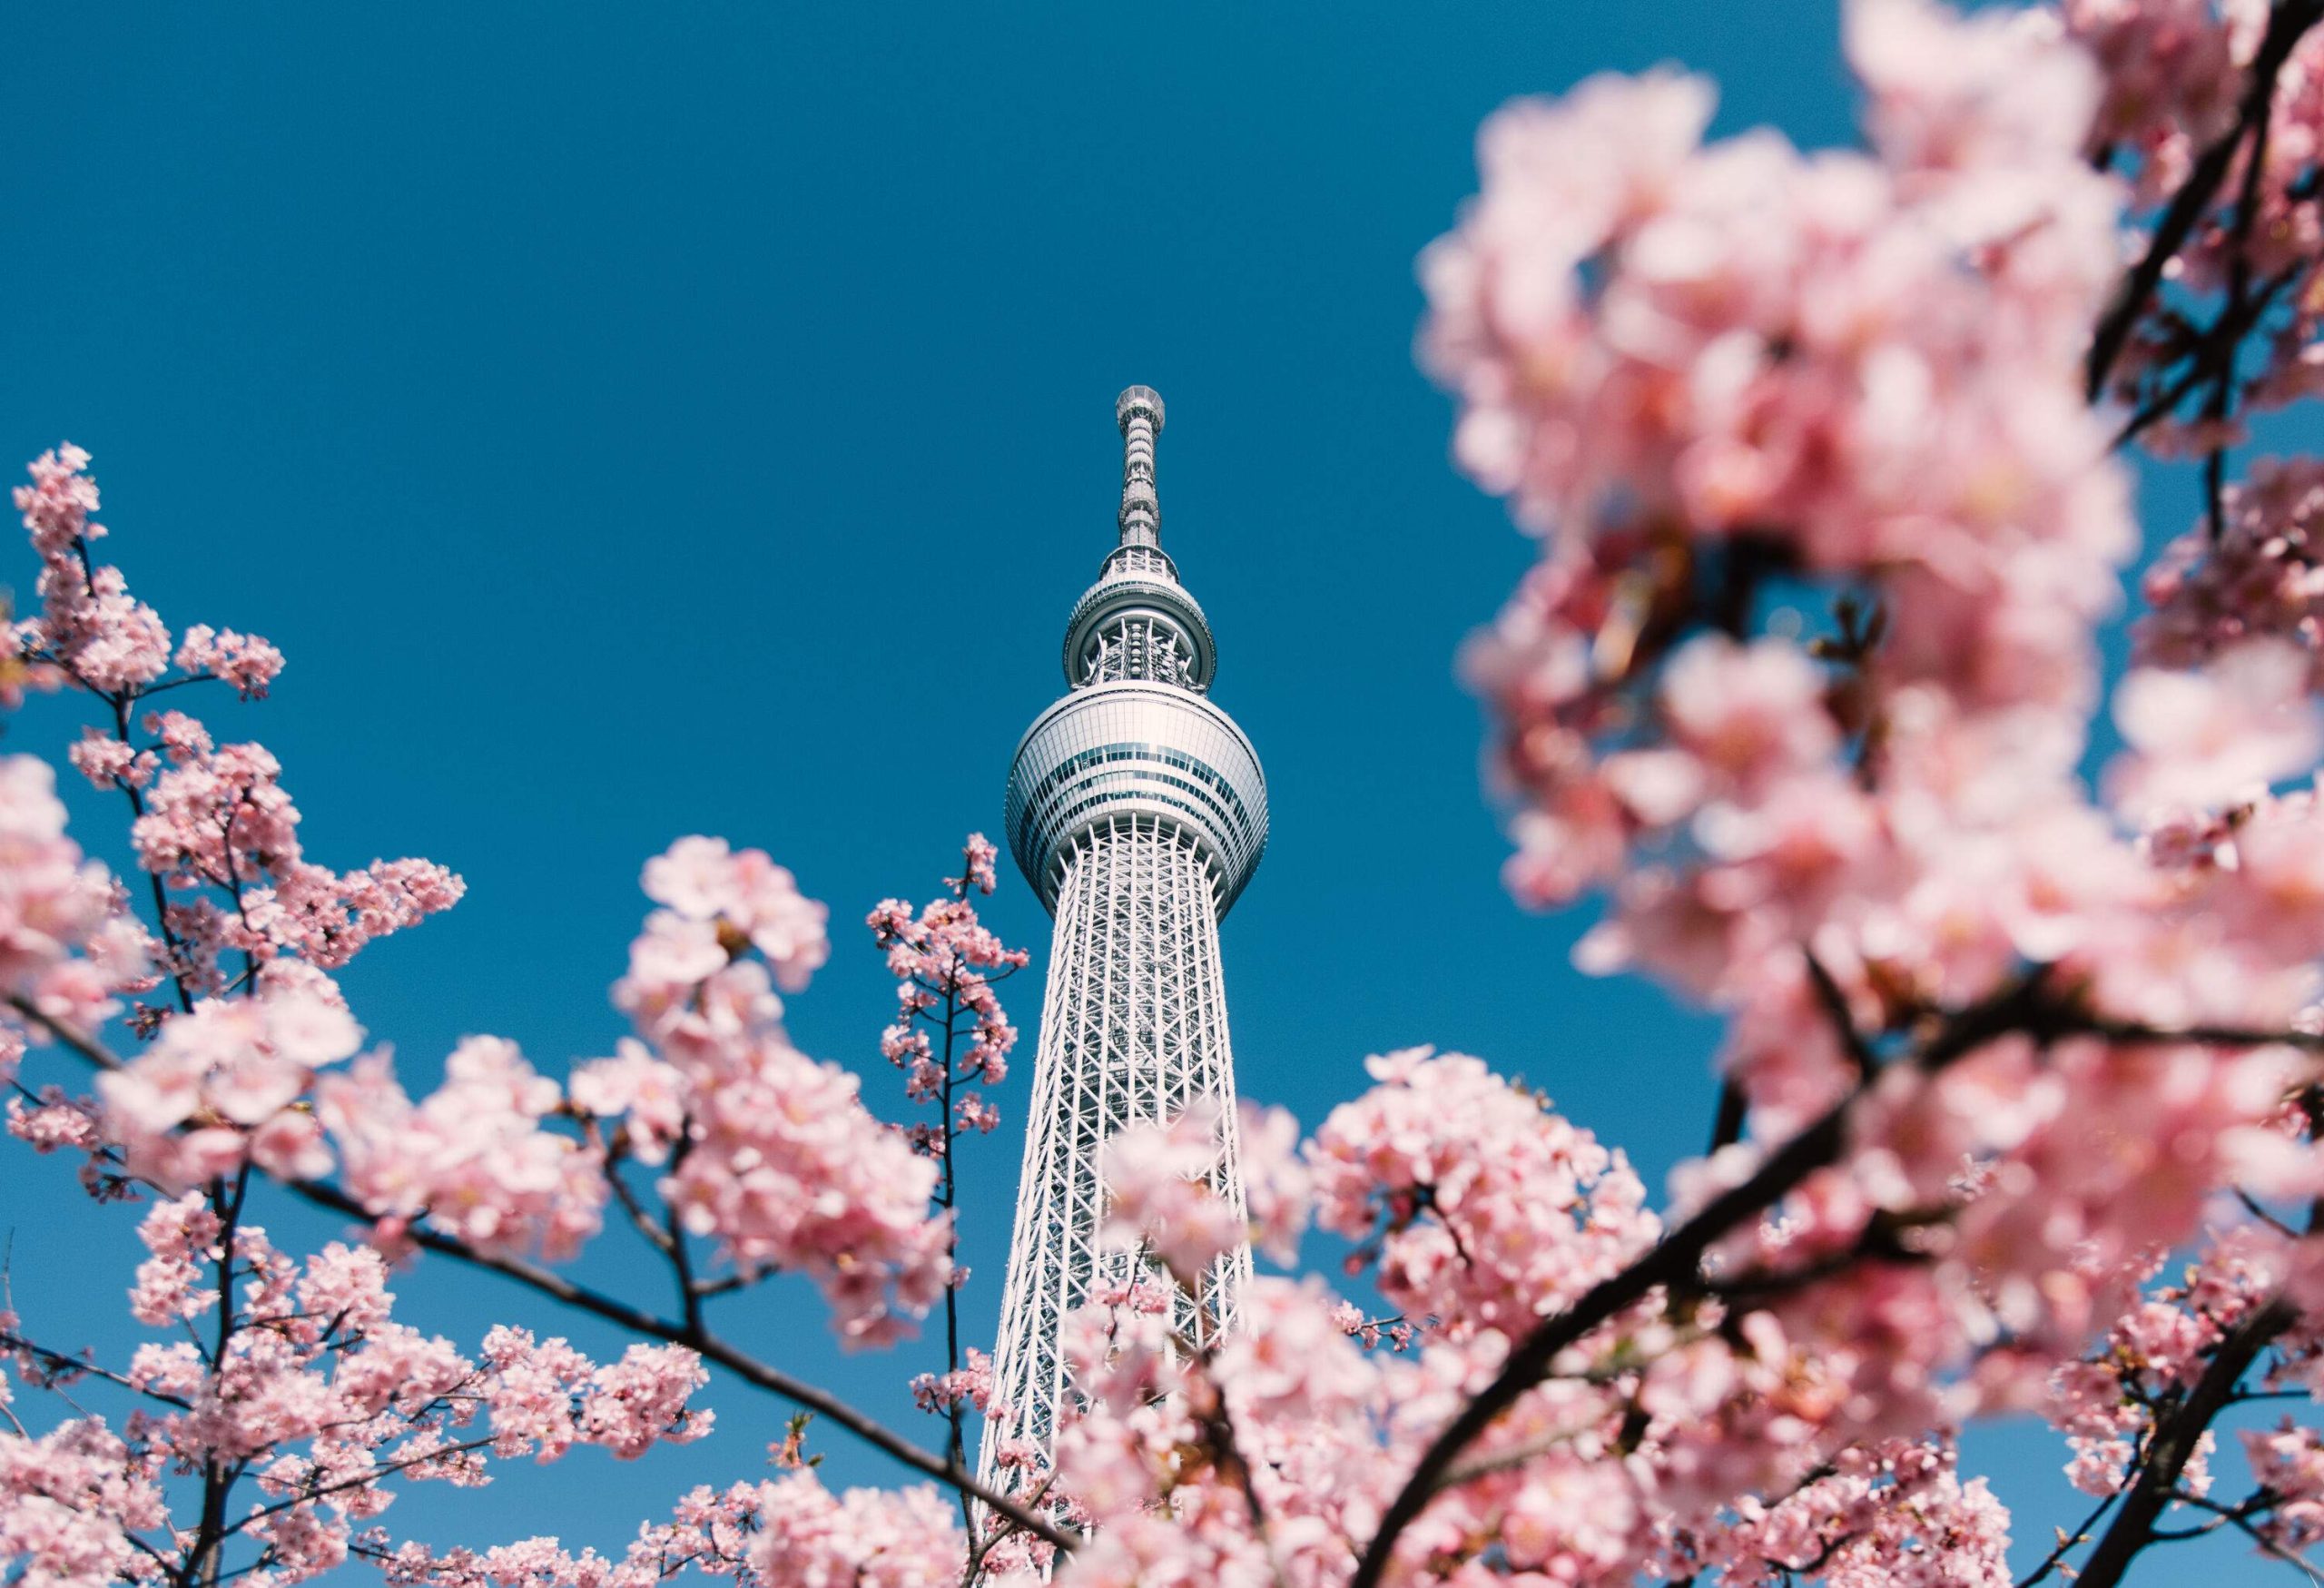 The Tokyo Skytree is a white broadcasting and observation tower that protrudes toward the blue sky against the cherry blossom in full bloom in the foreground.